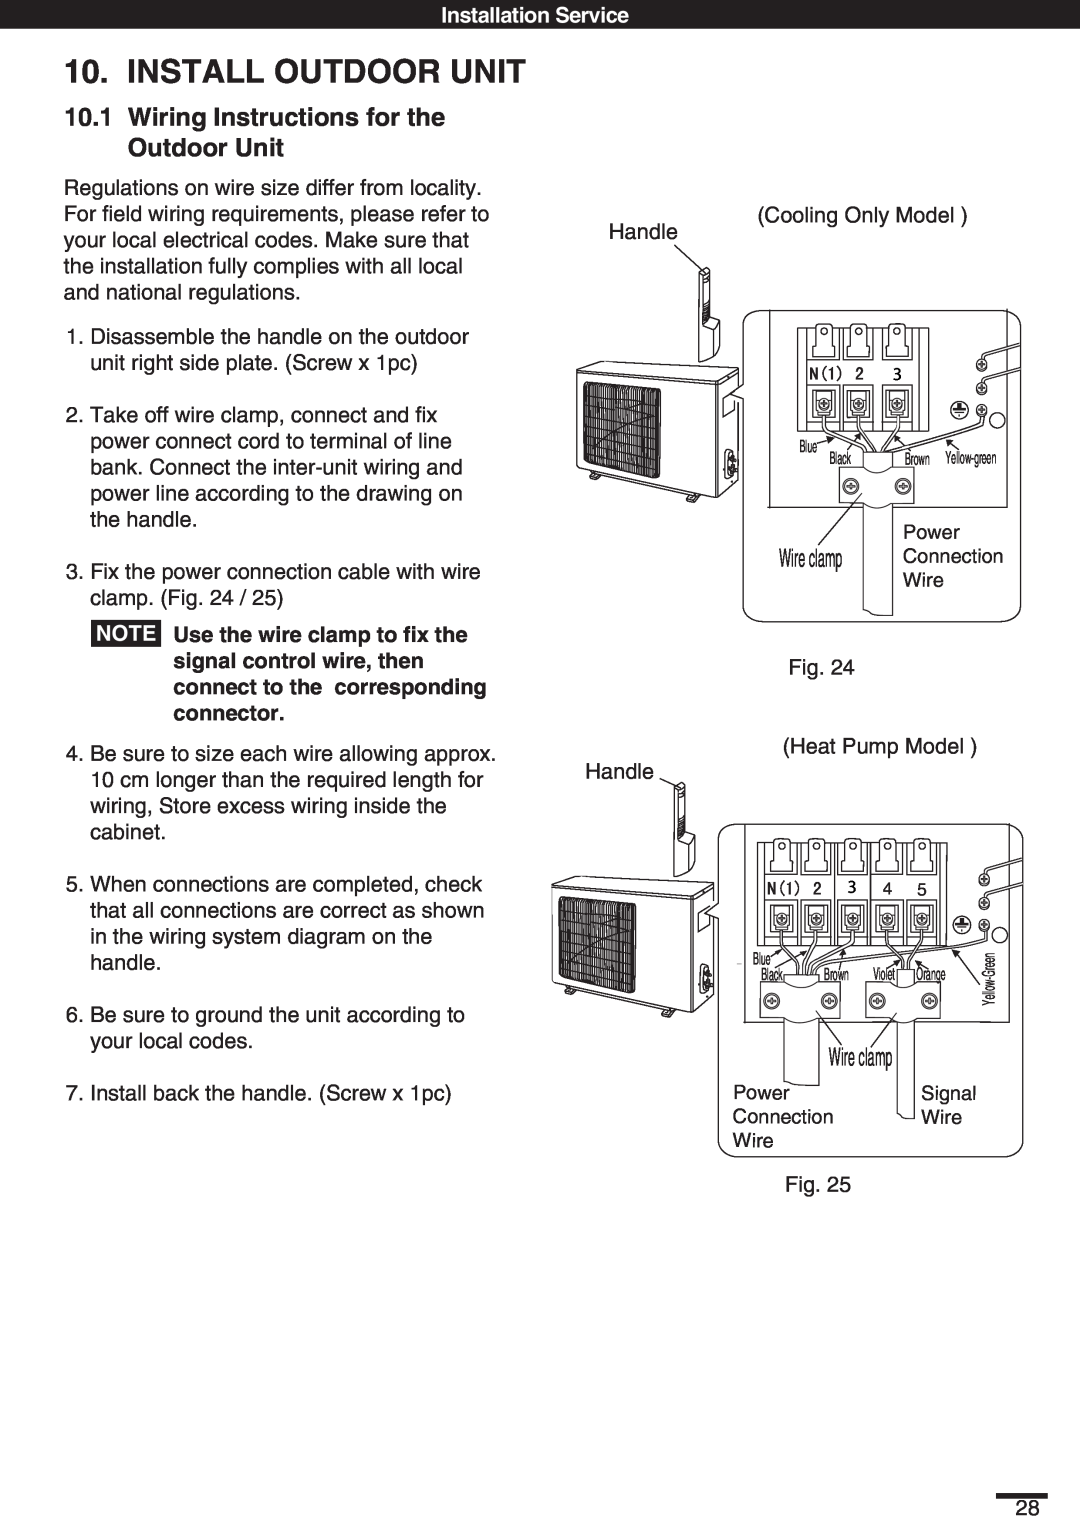 Haier SAP-K18AM Install Outdoor Unit, 10.1Wiring Instructions for the Outdoor Unit, Wire clamp, Installation Service 